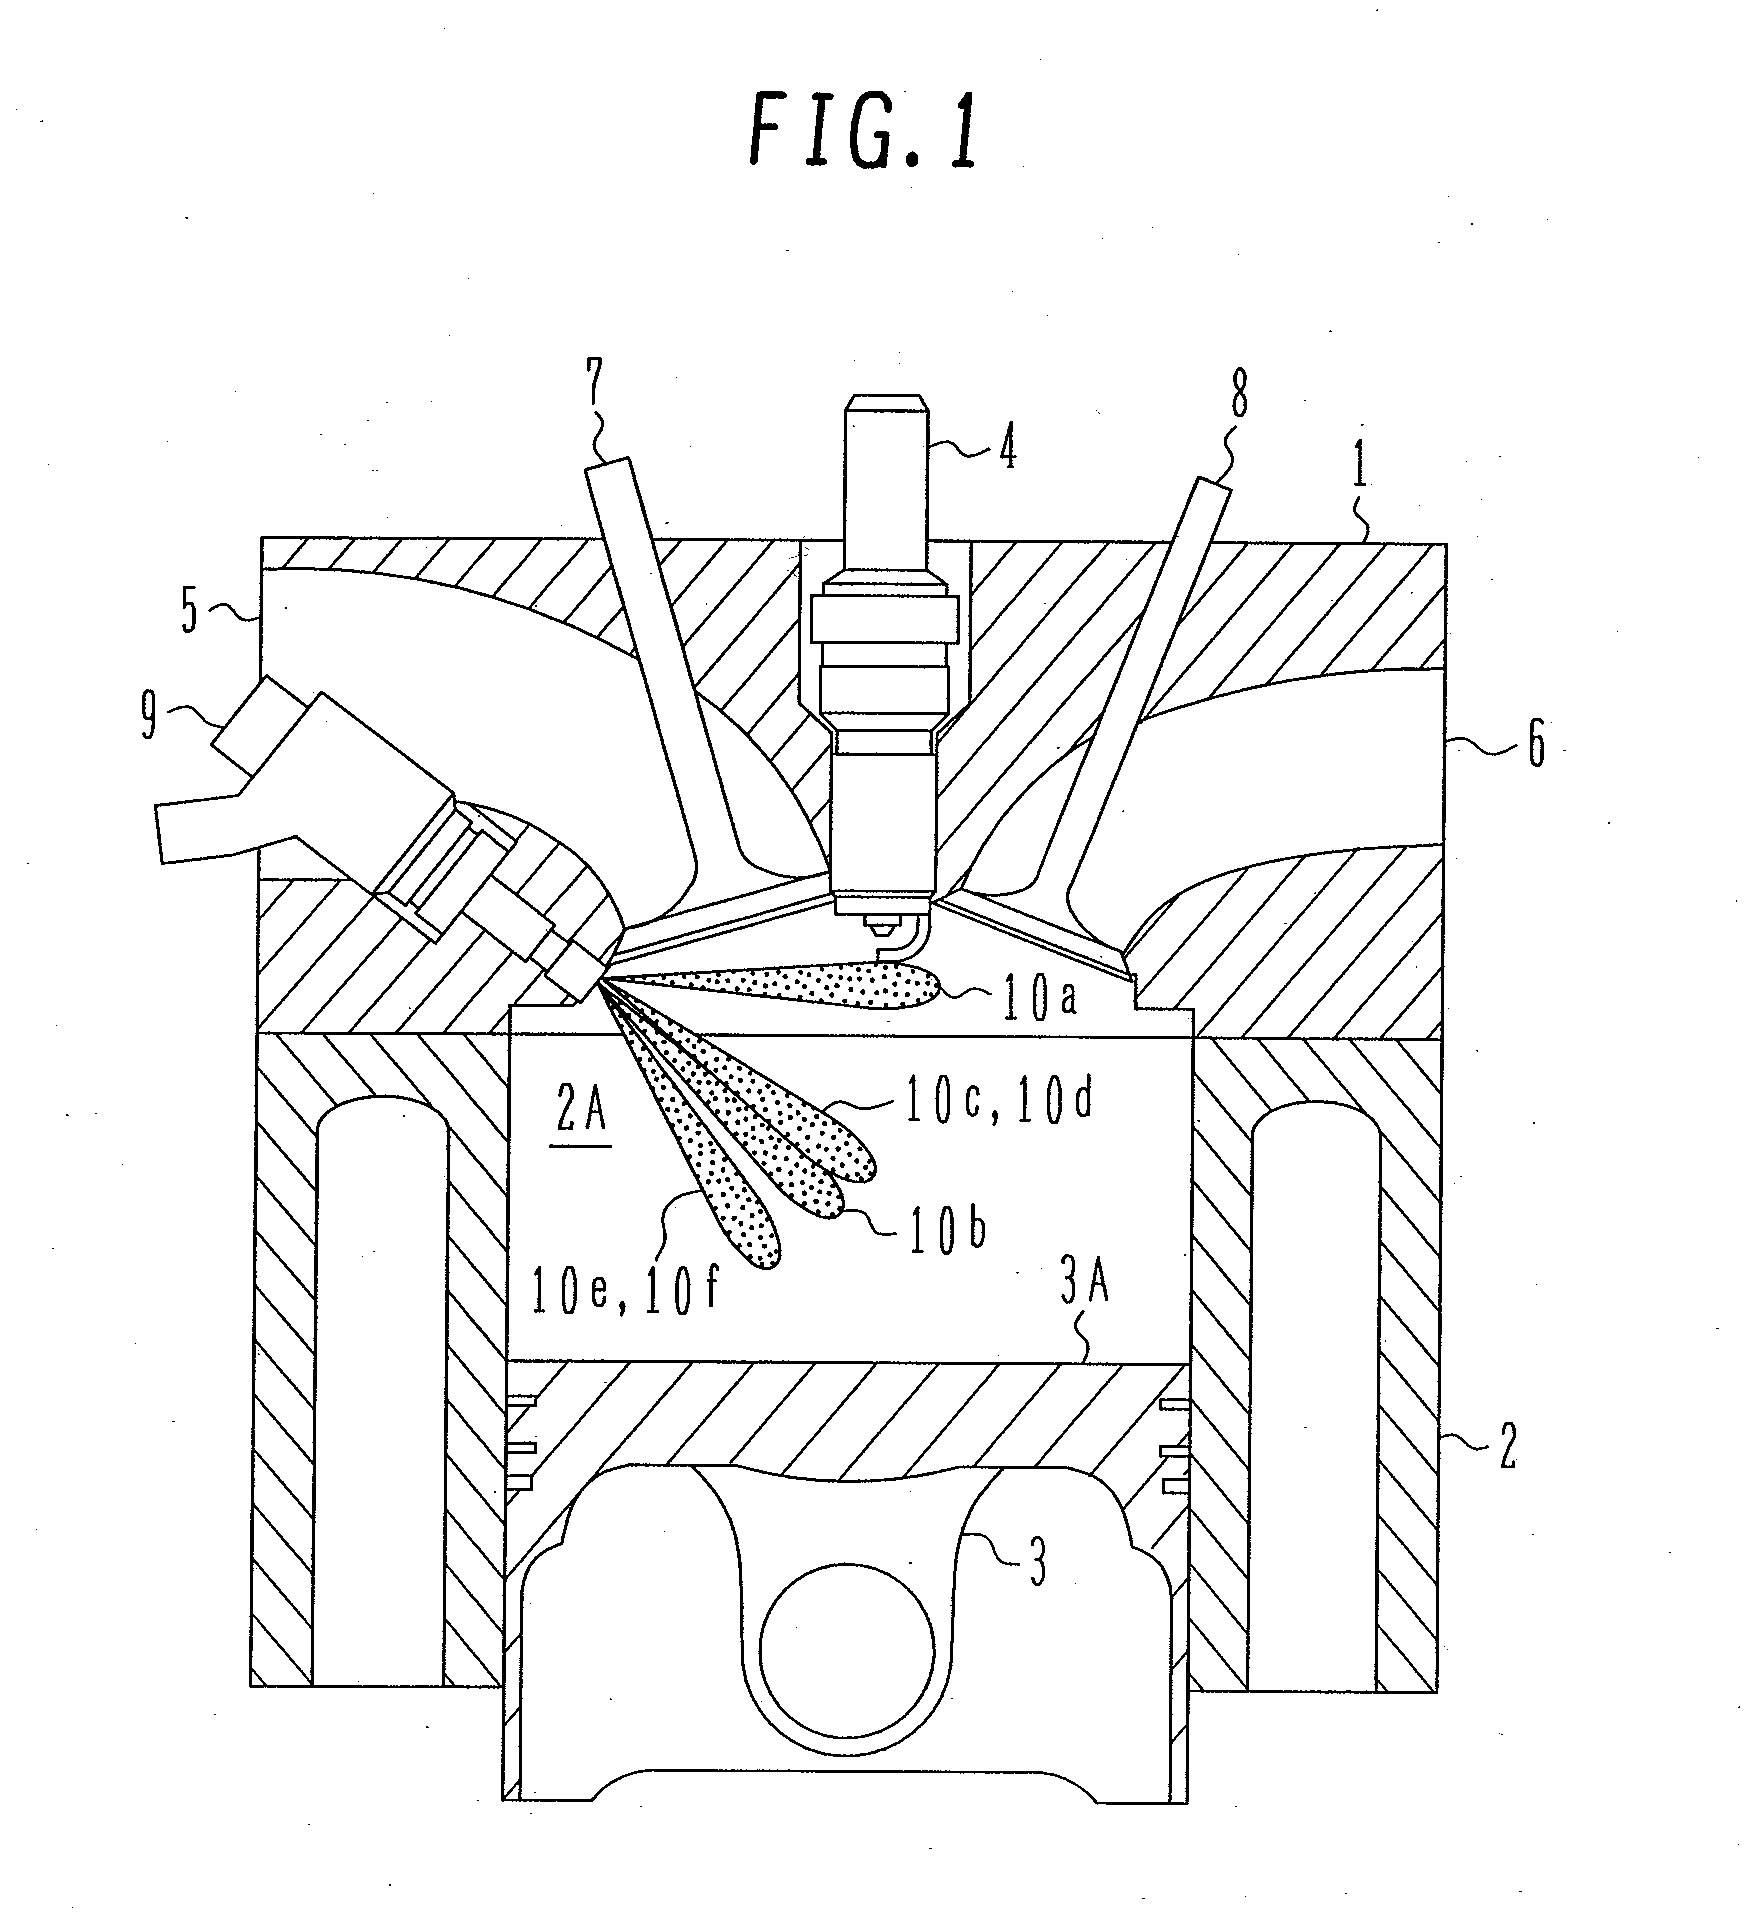 Direct Injection Internal Combustion Engine and Injector Used for Direct Injection Internal Combustion Engine